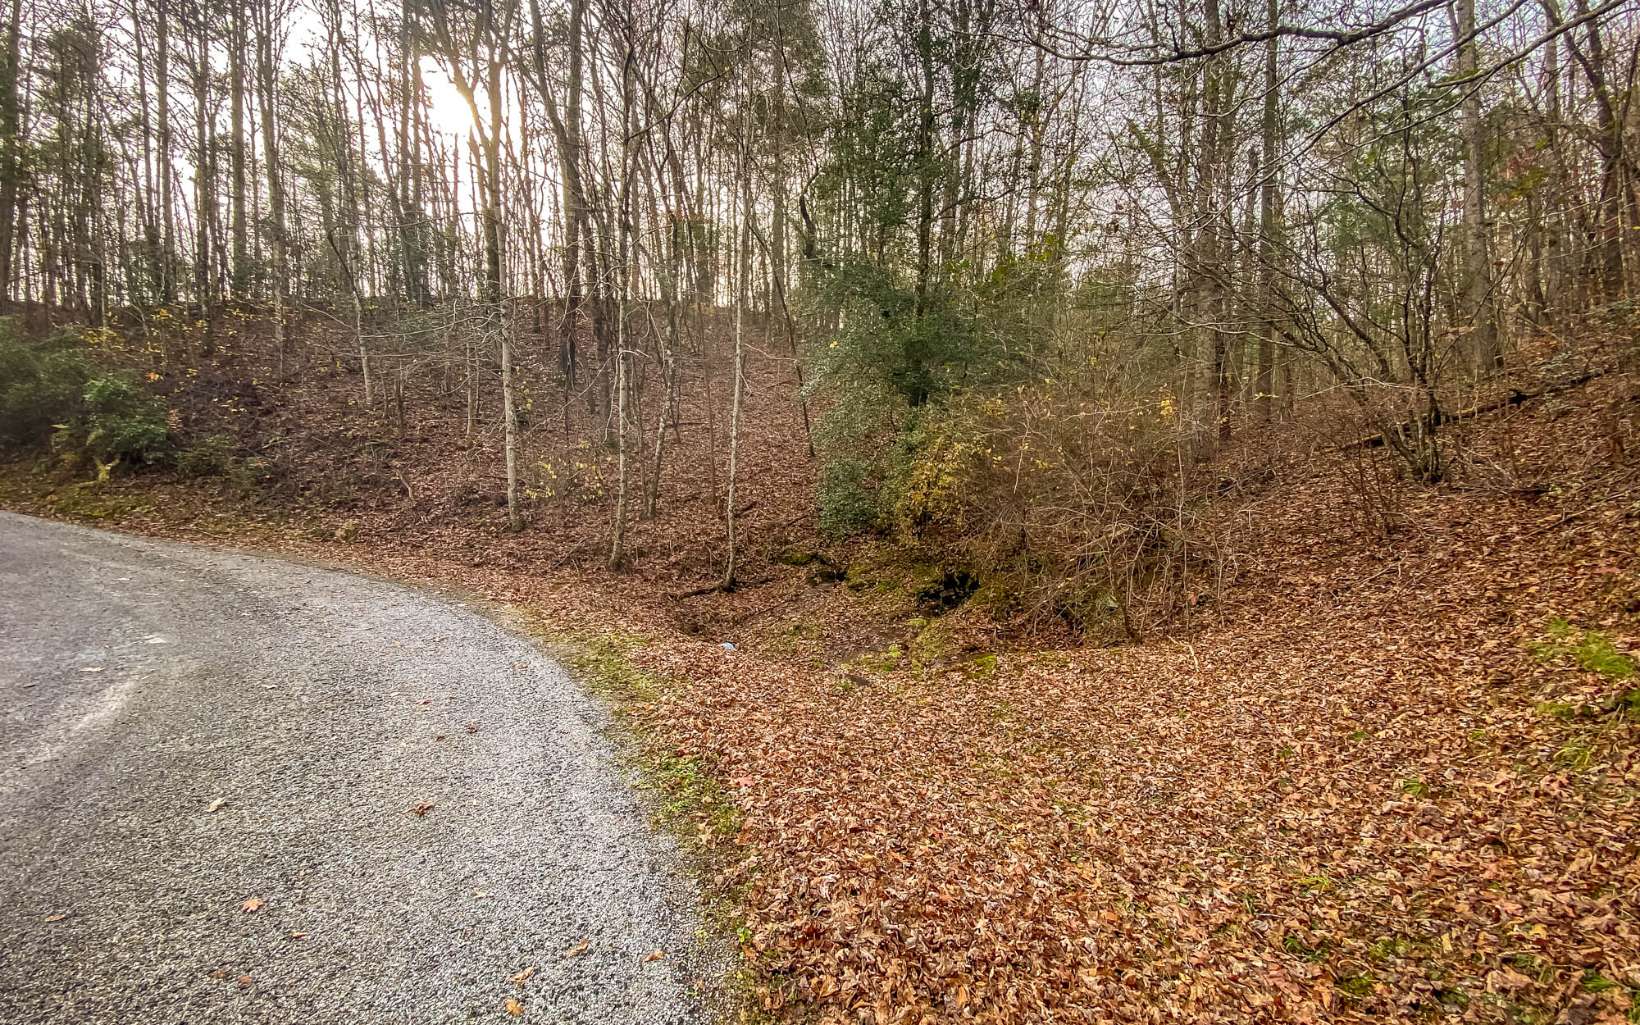 Large 3 acre wooded lot in the inviting Quinn Springs Subdivision. Paved roads all the way. Gentle creek runs along the property line. Nice building site with seasonal mountain view. What an awesome place to build your forever home.